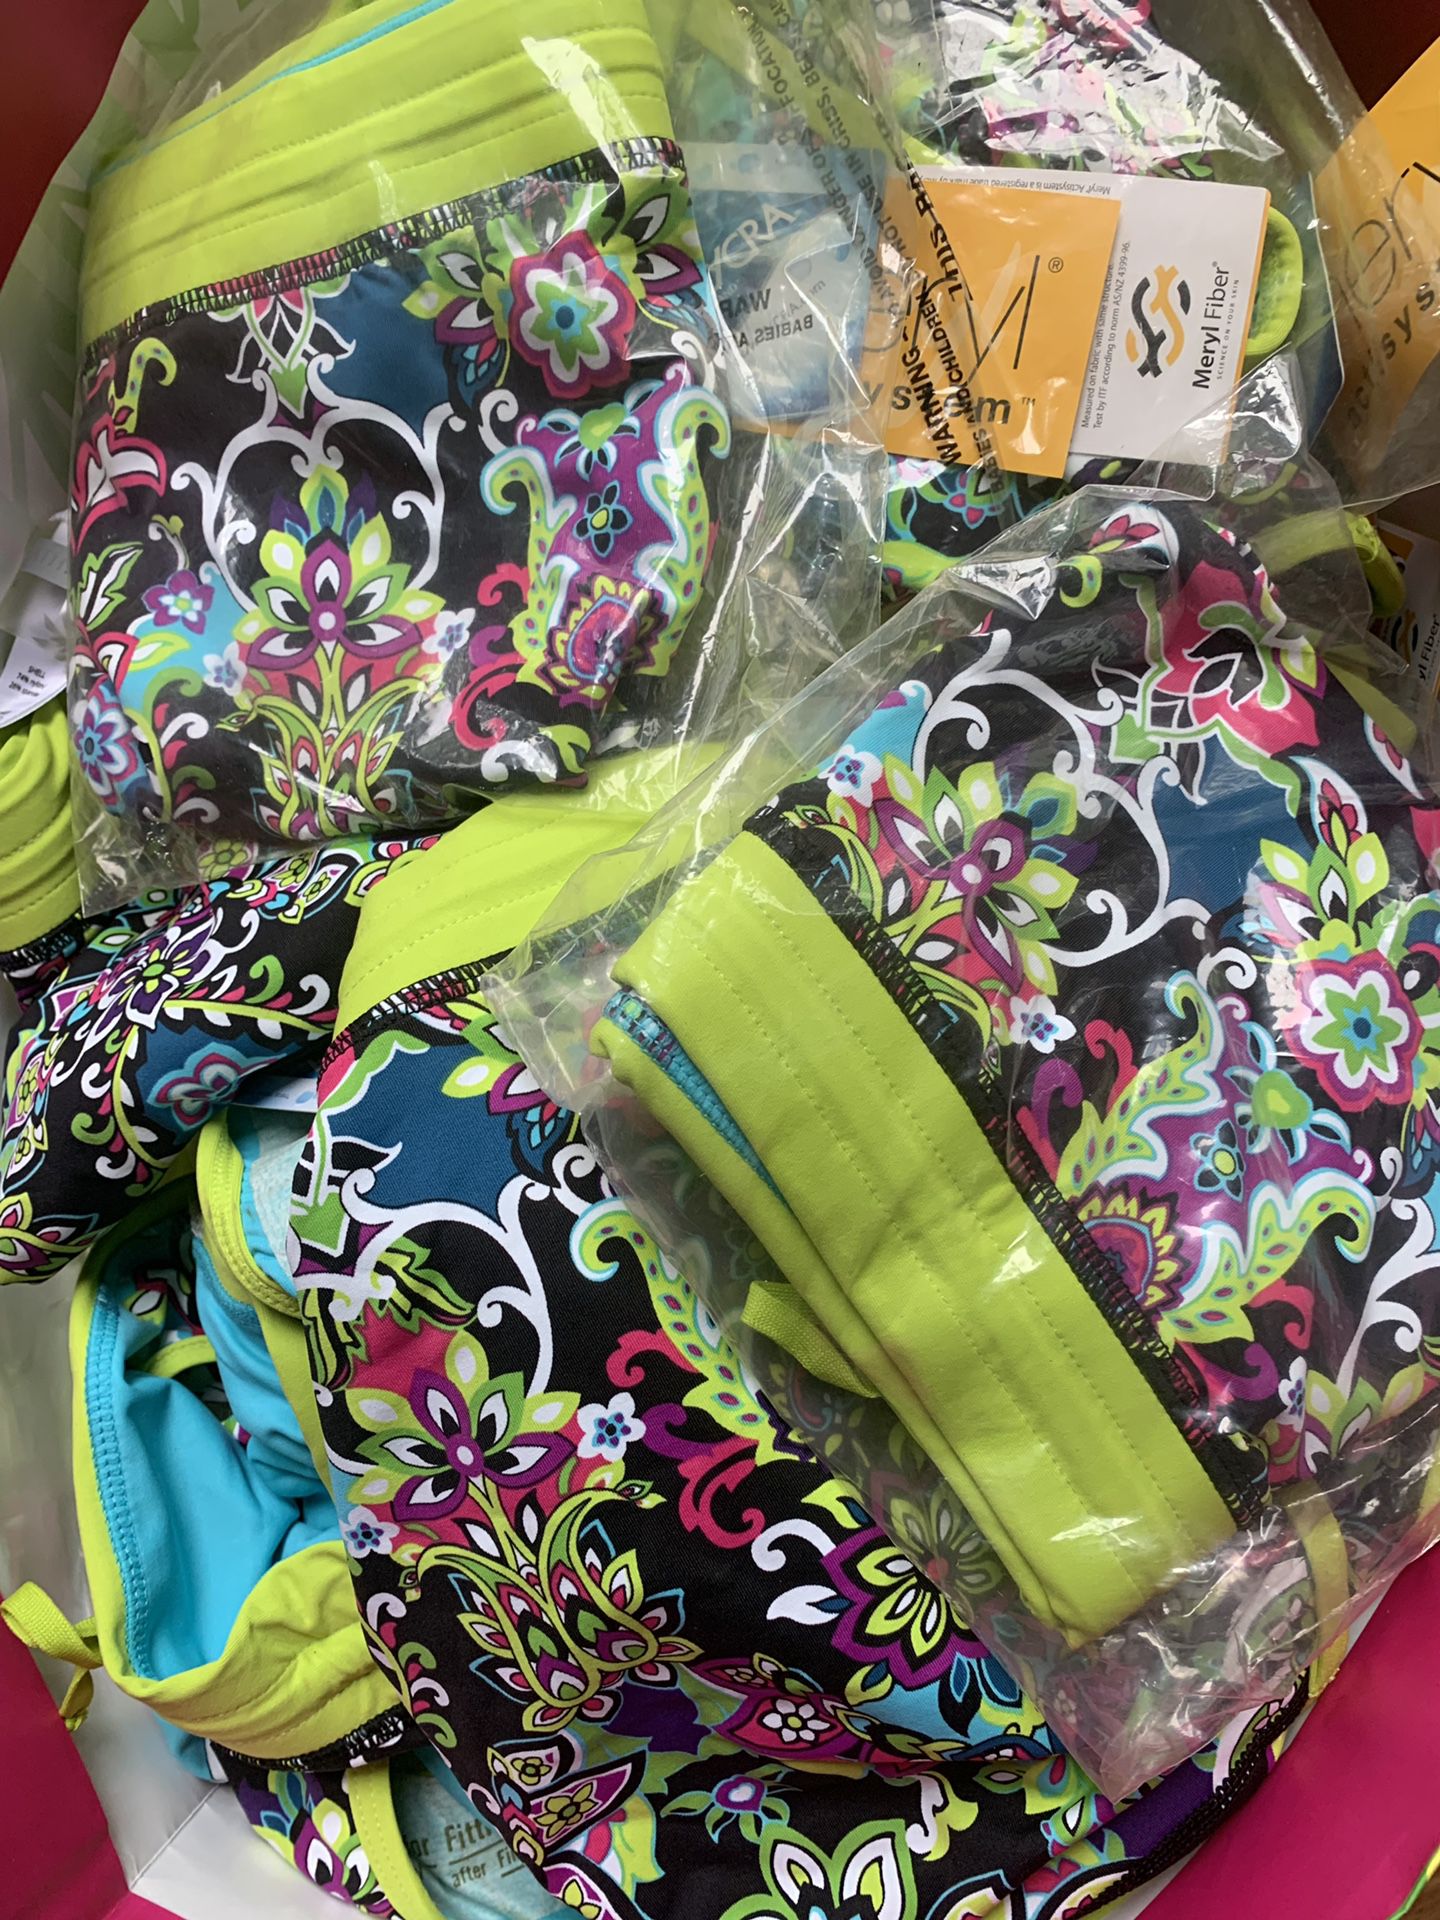 Brand new Athleta reversible swimsuit bottoms size large. Blowout. $2.50 x 63 pieces. Pick up in Jupiter